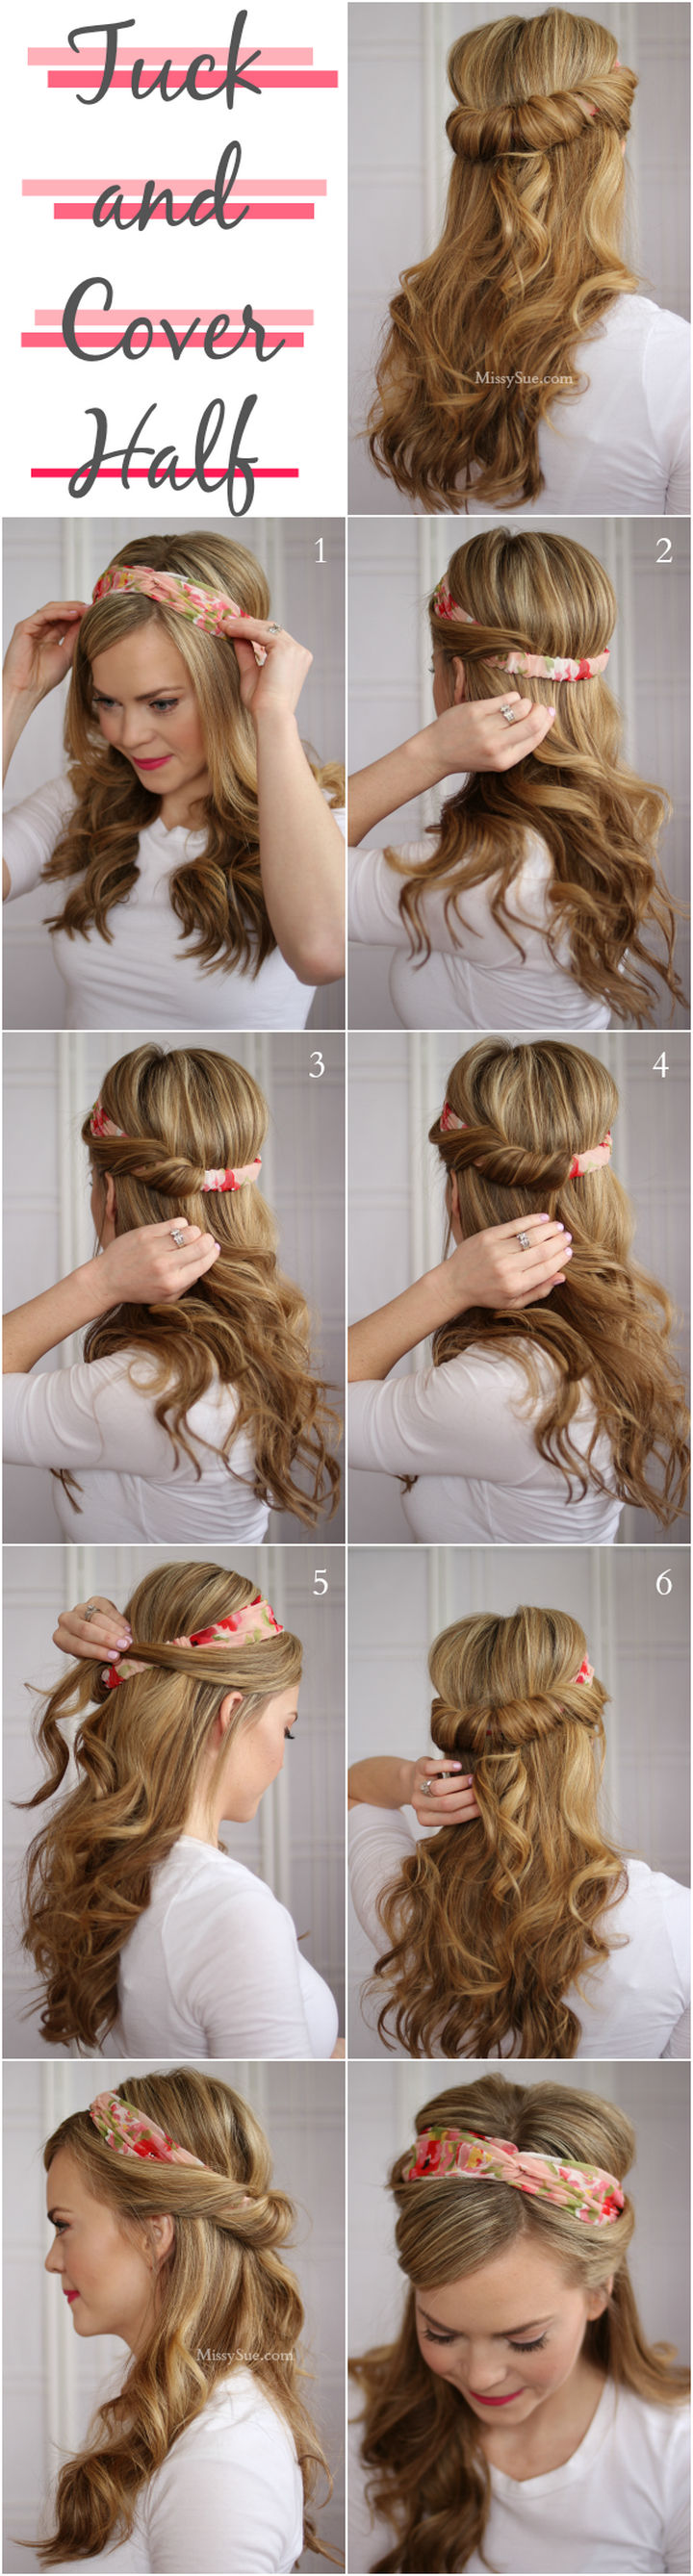 25 Lazy Girl Hair Hacks - Tuck and cover half of your hair.